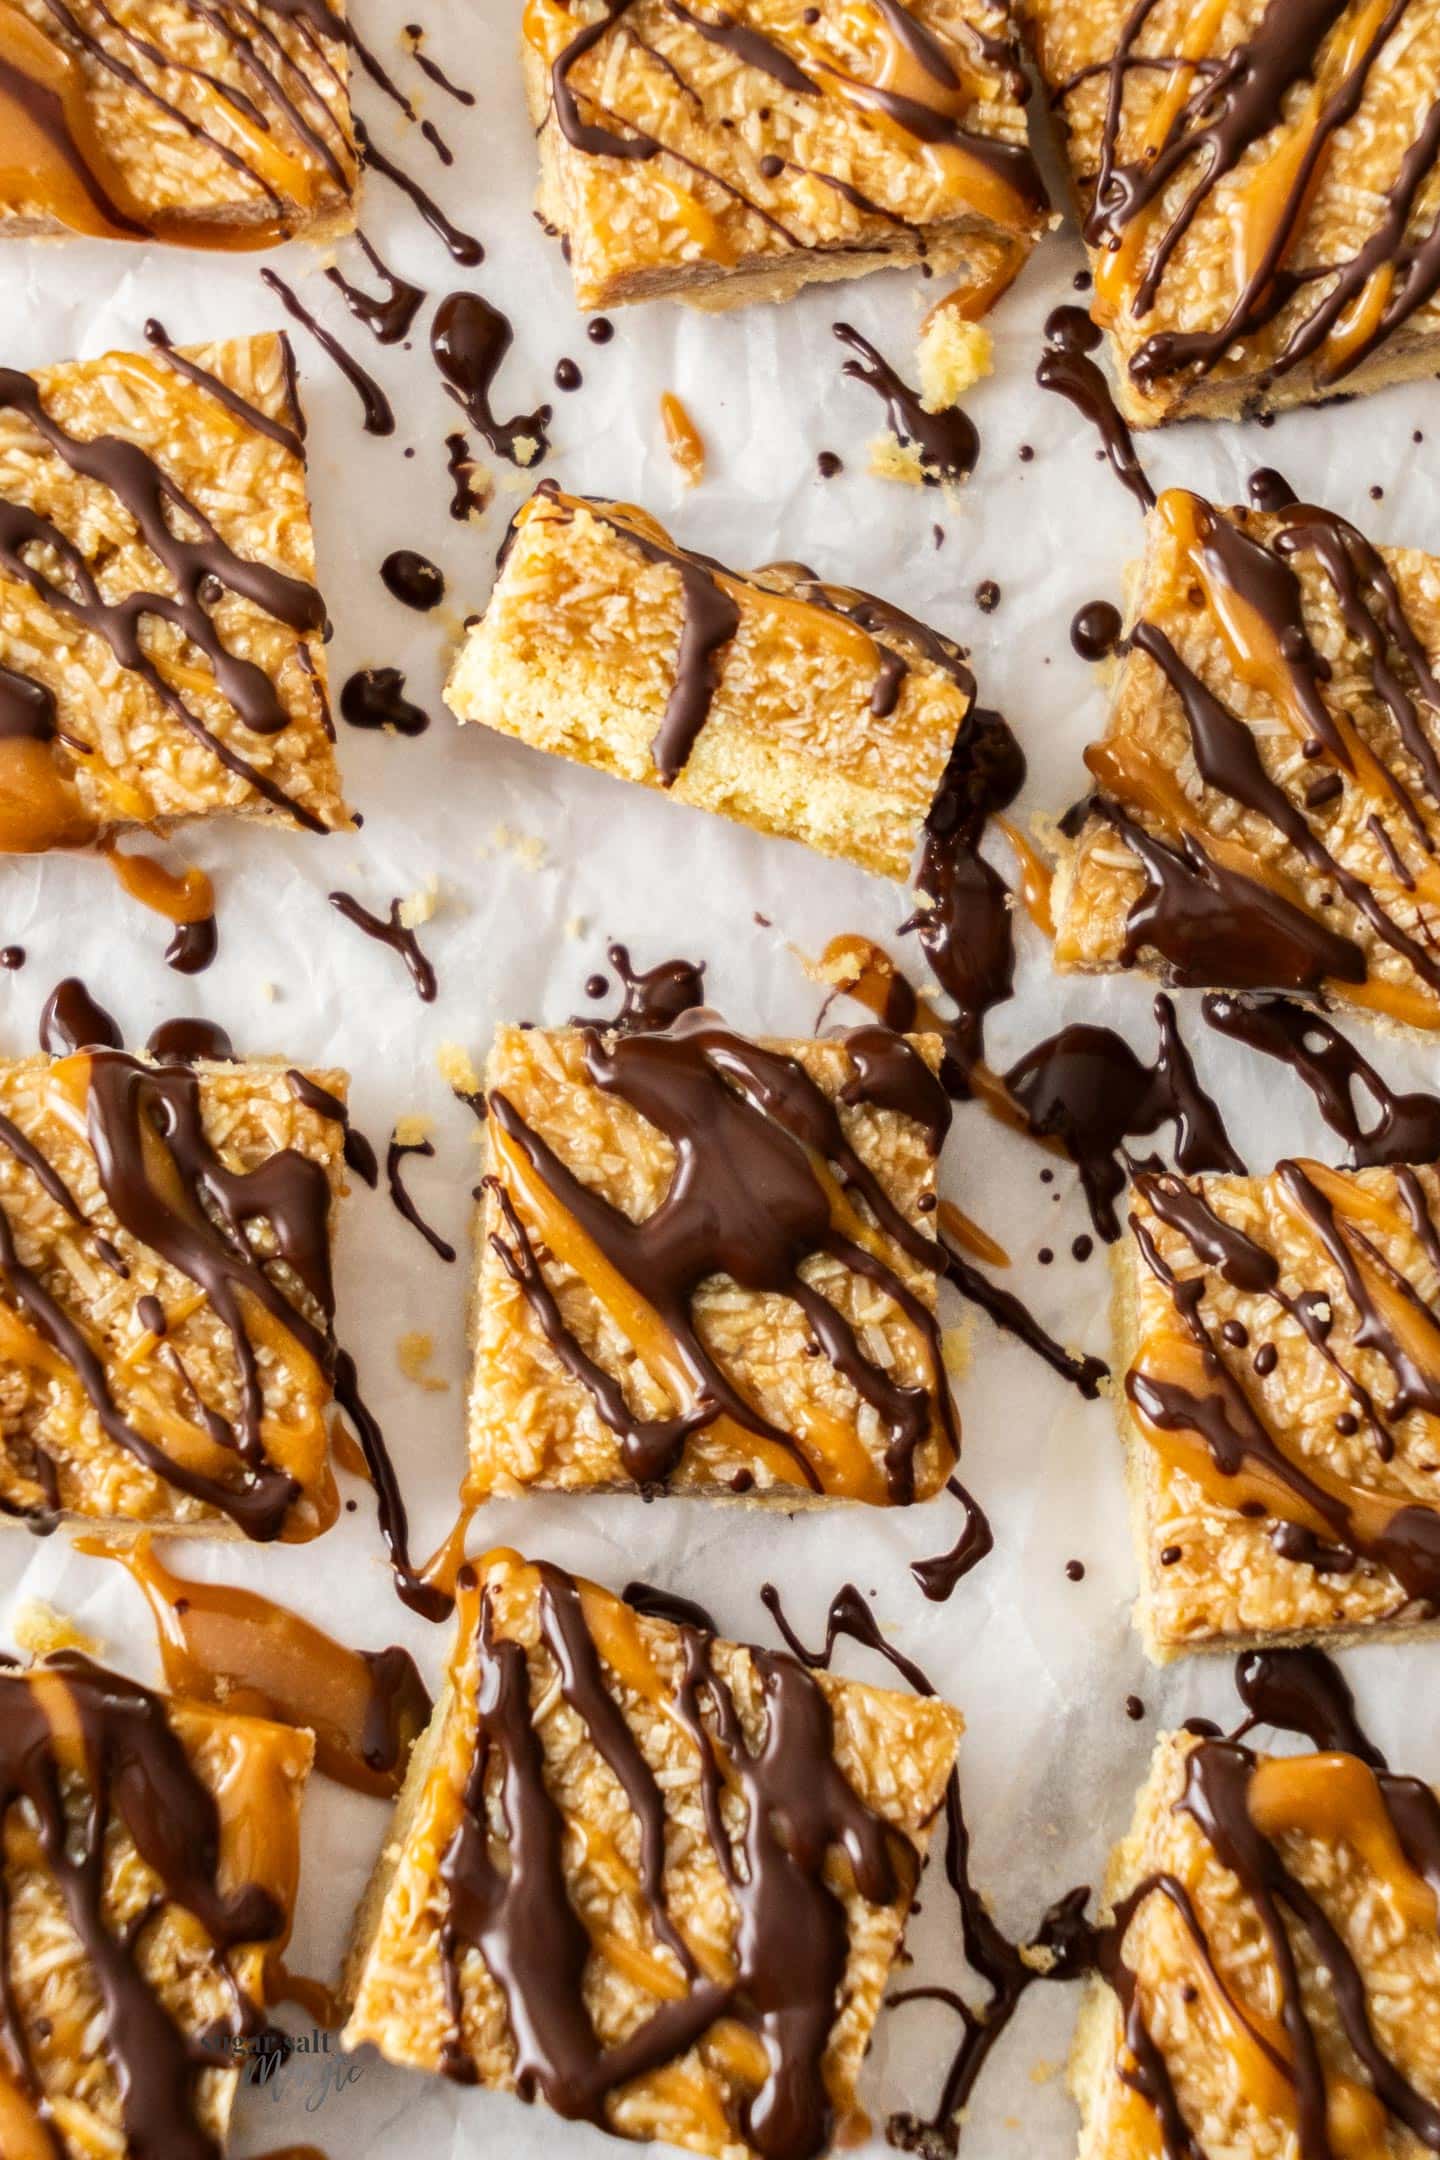 12 coconut caramel bars drizzled with chocolate.